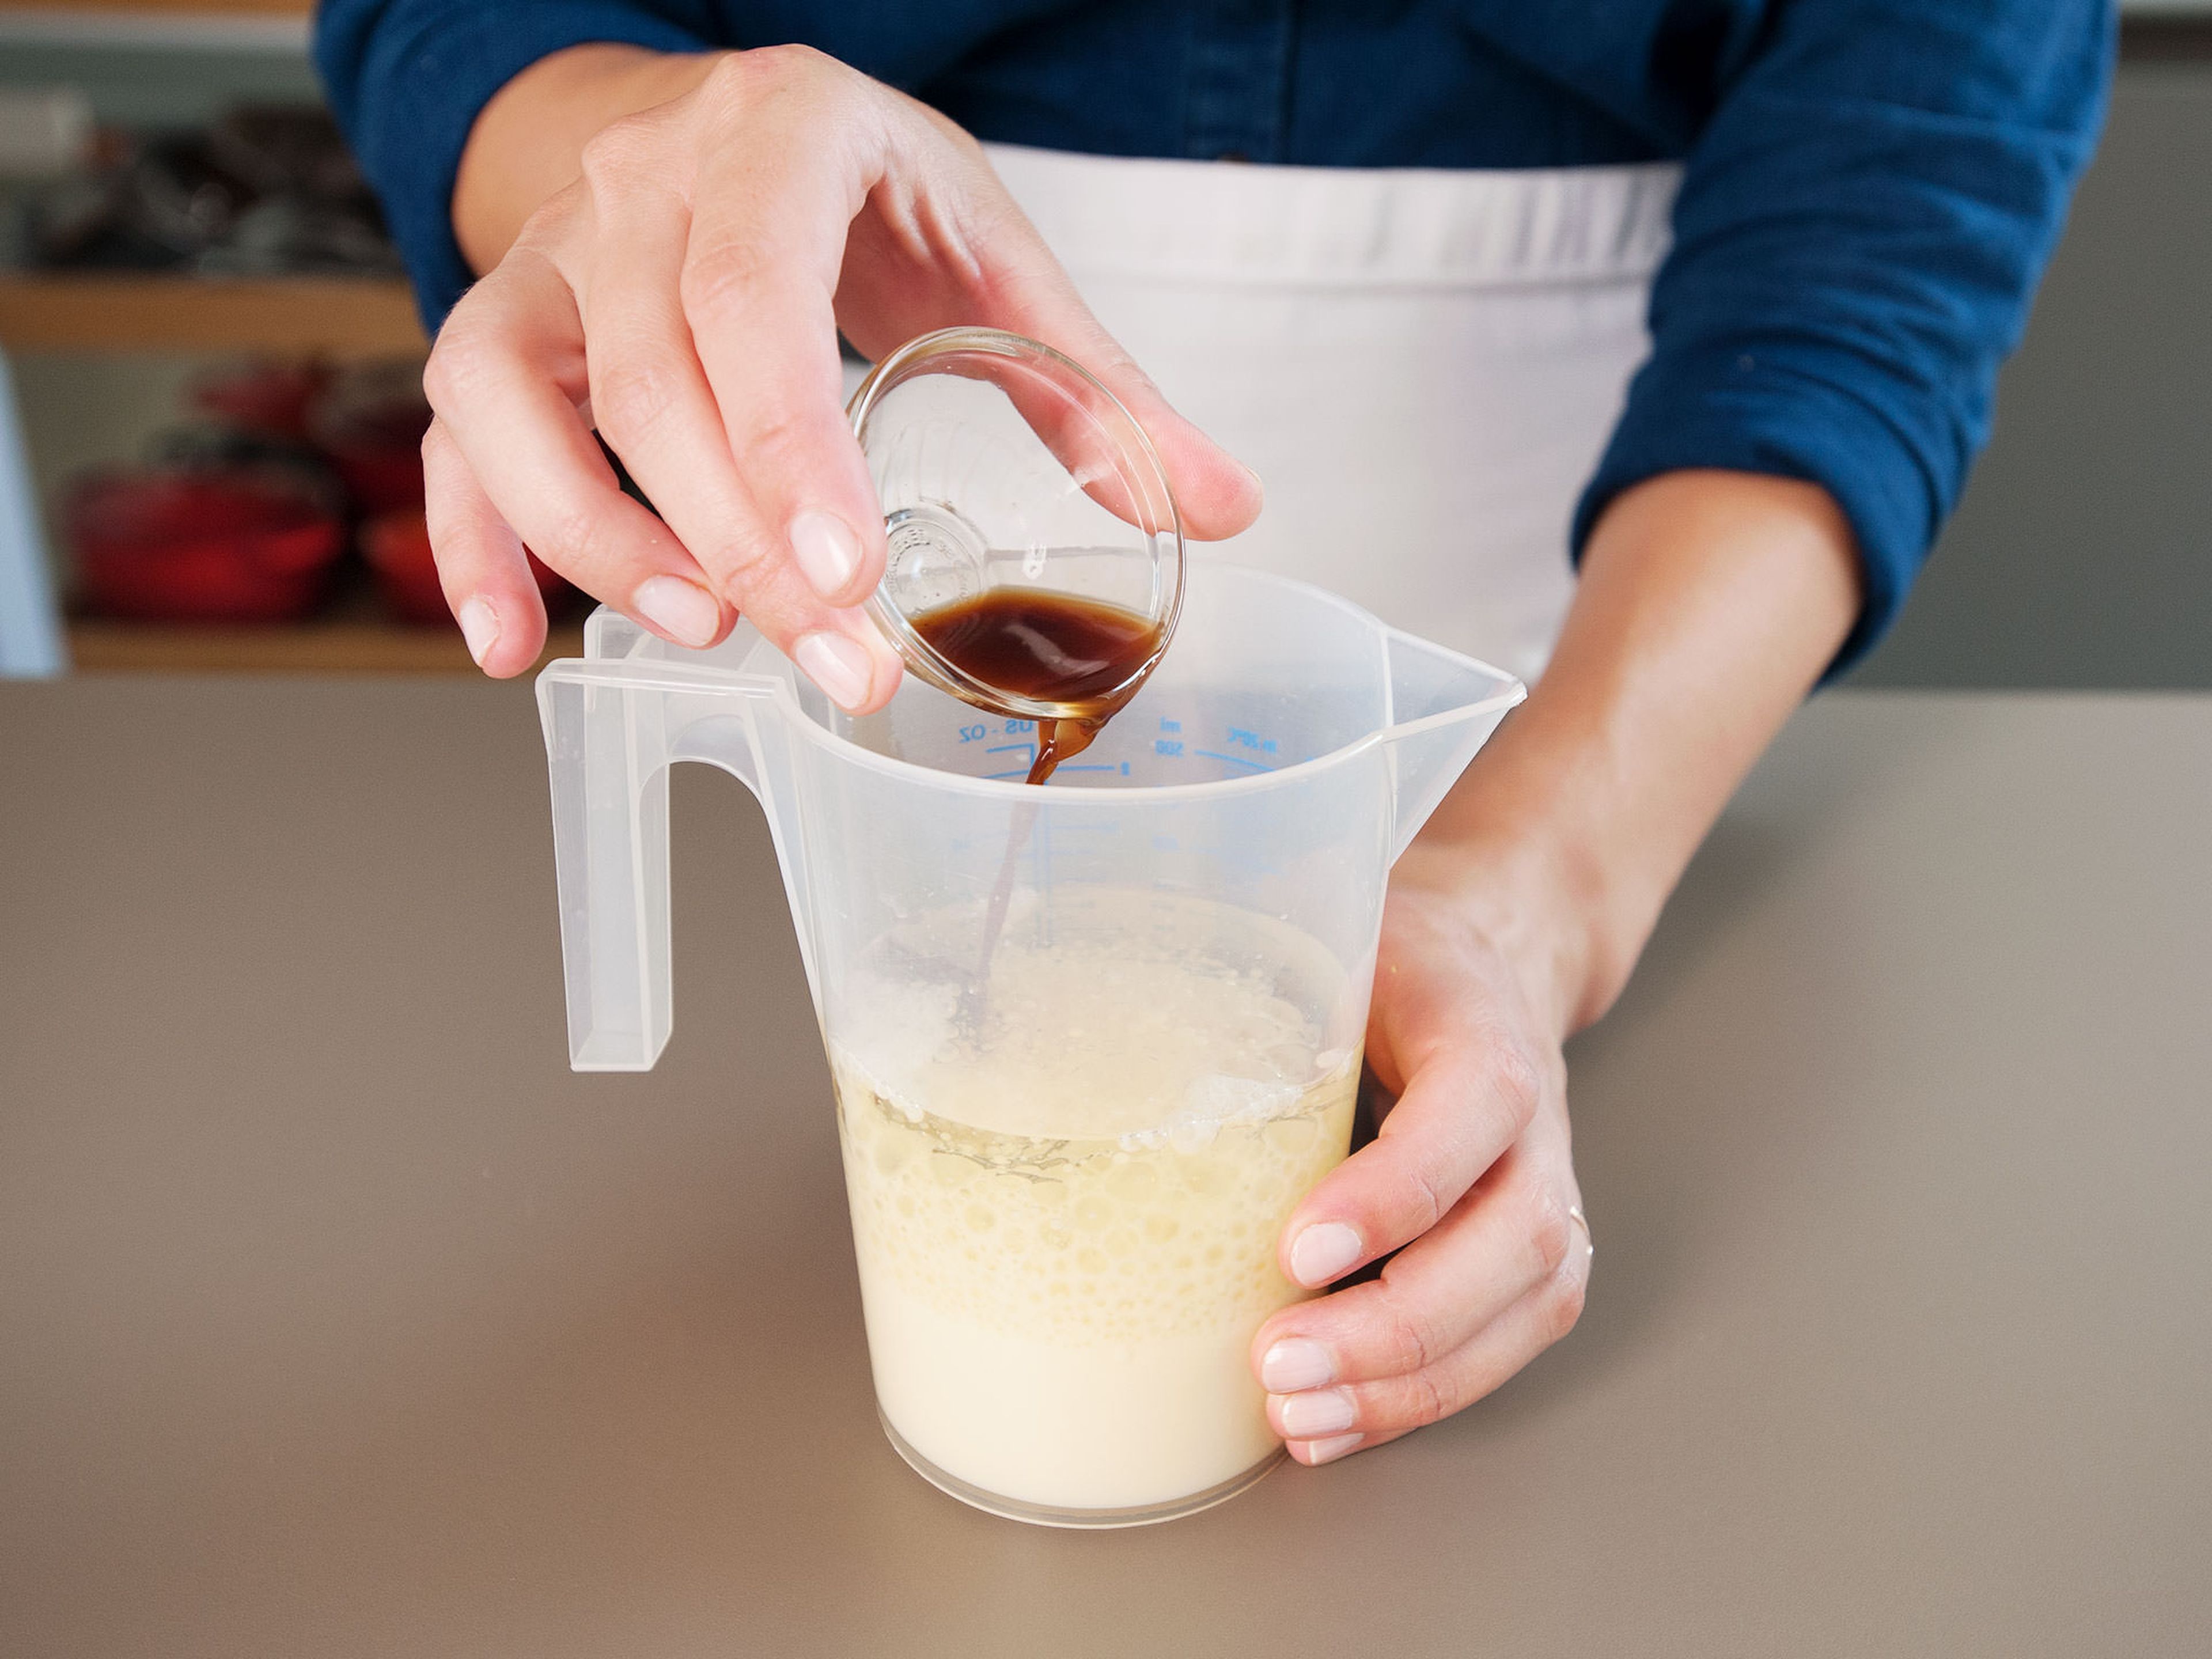 Next, whisk together vegetable oil, milk alternative, and vanilla extract in a large measuring cup.